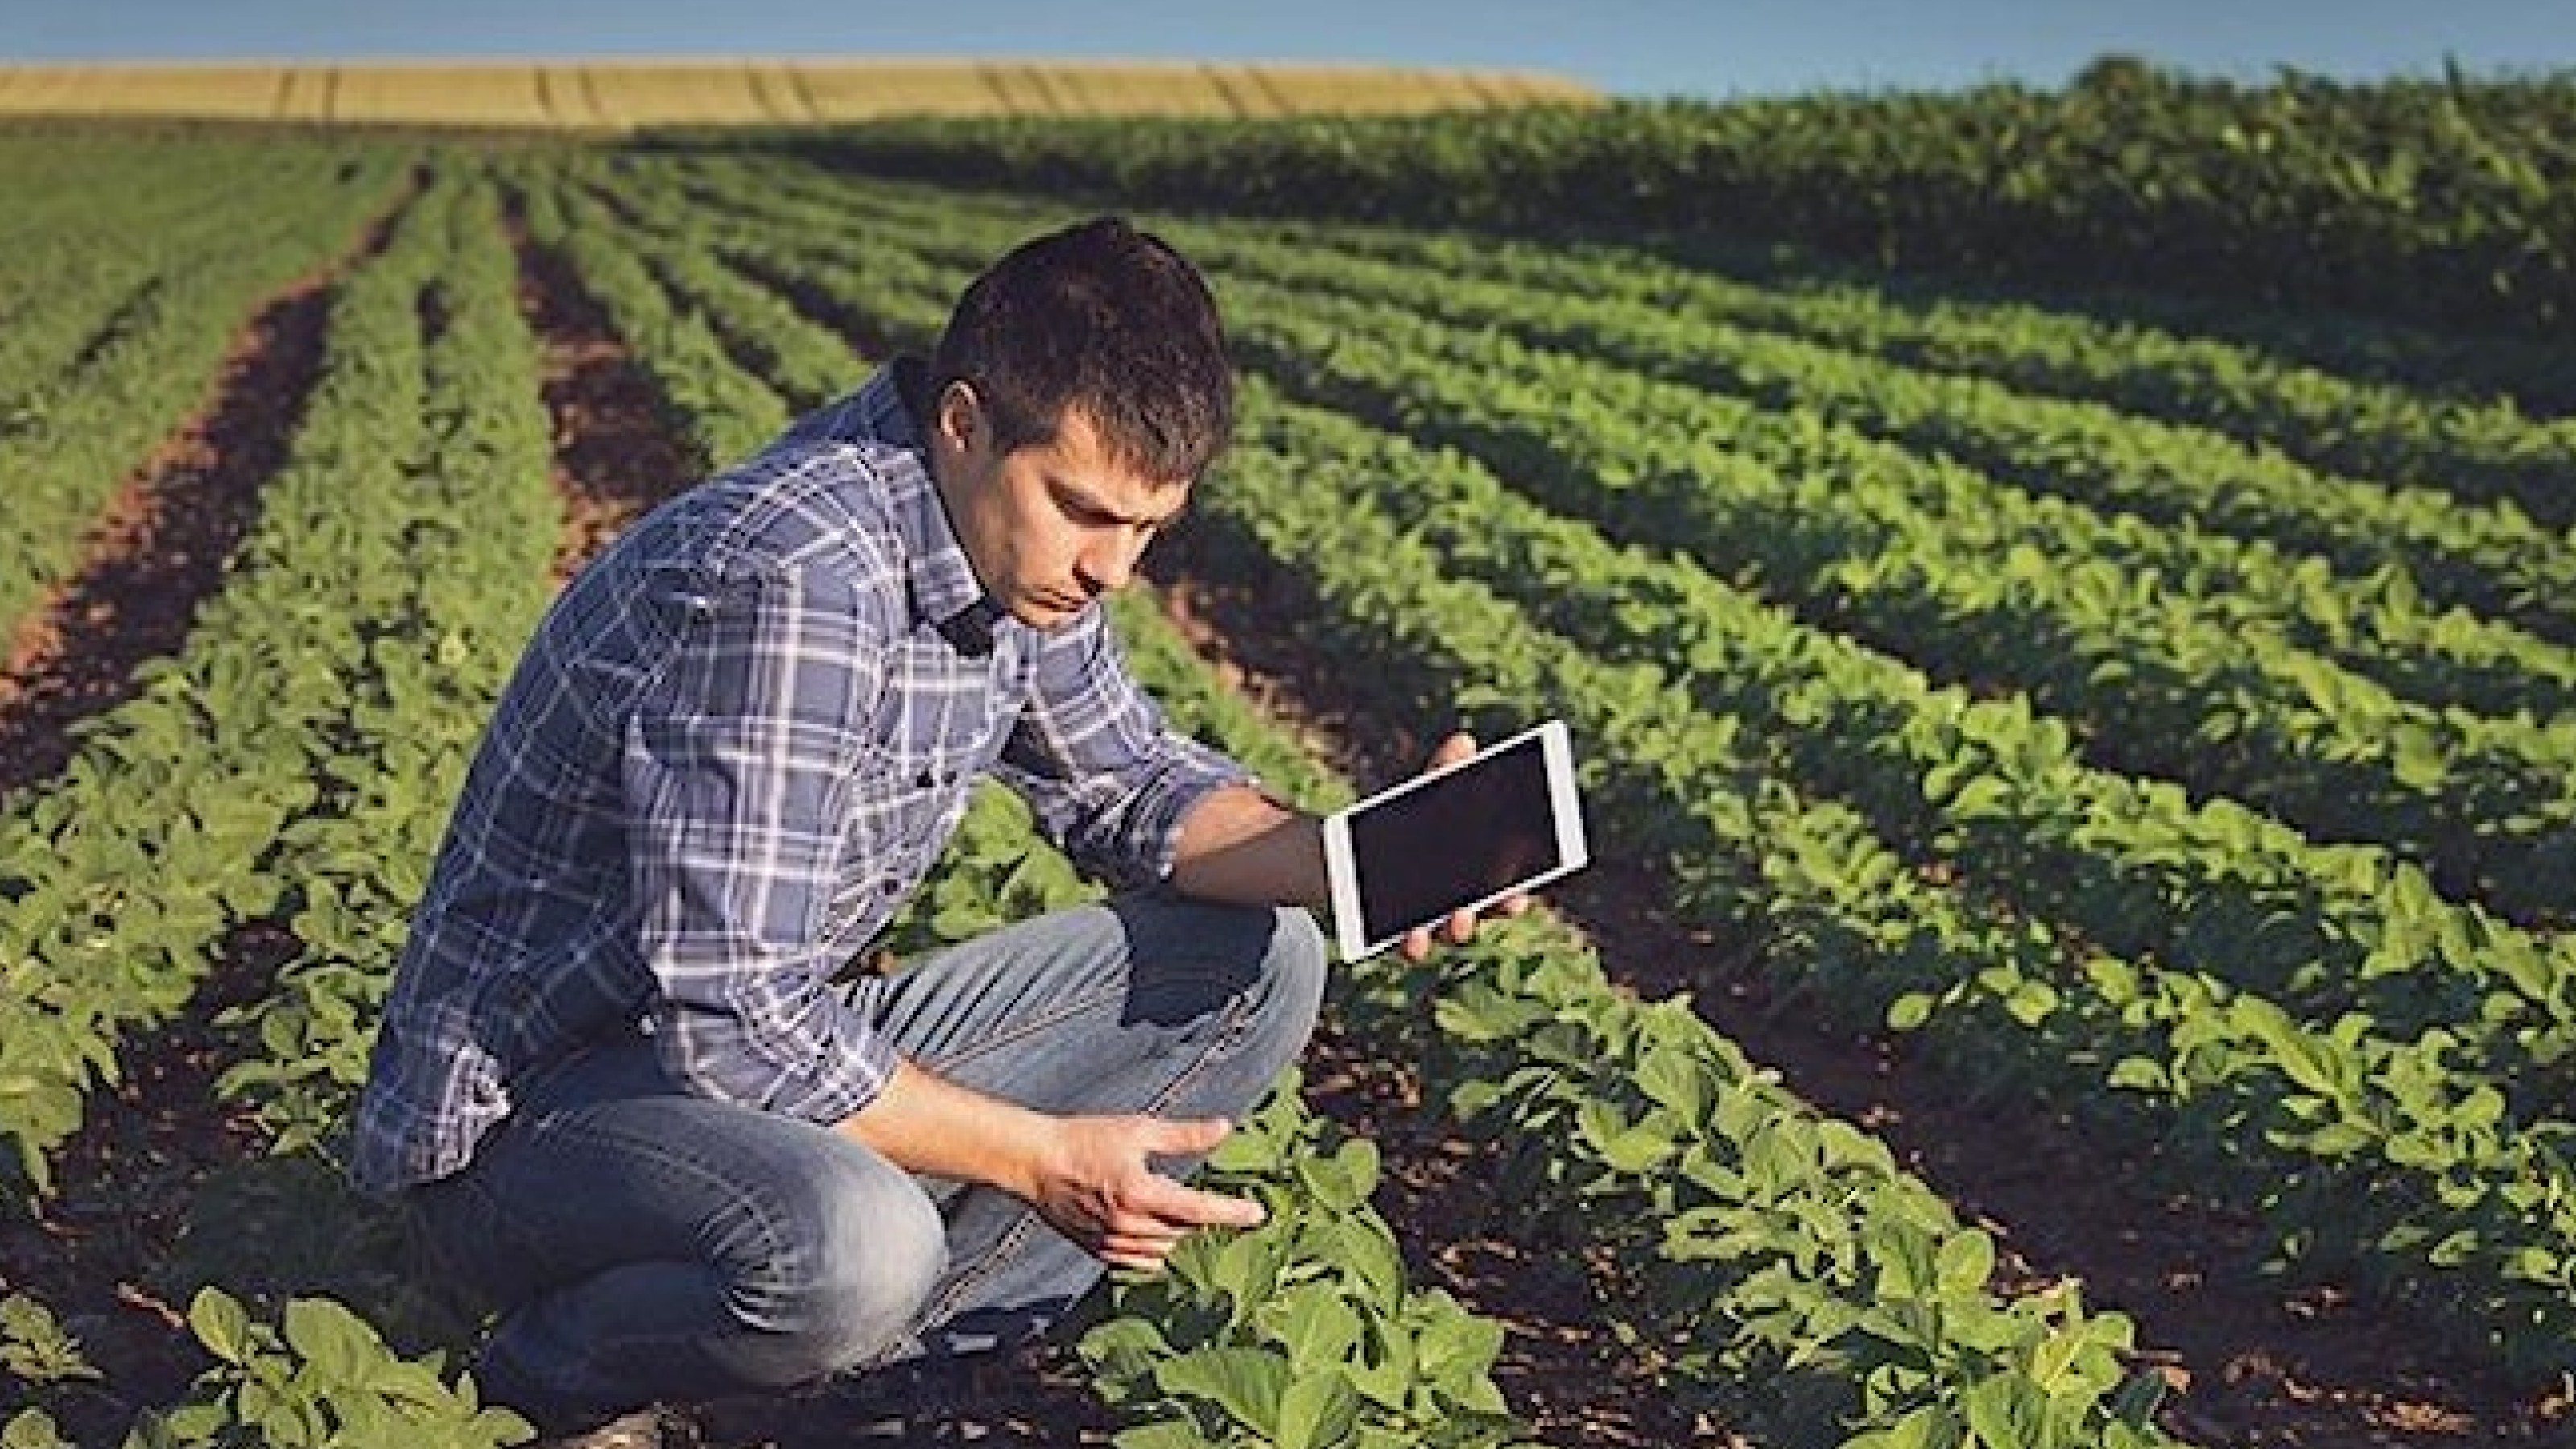 A person on a farm with a tablet in one hand